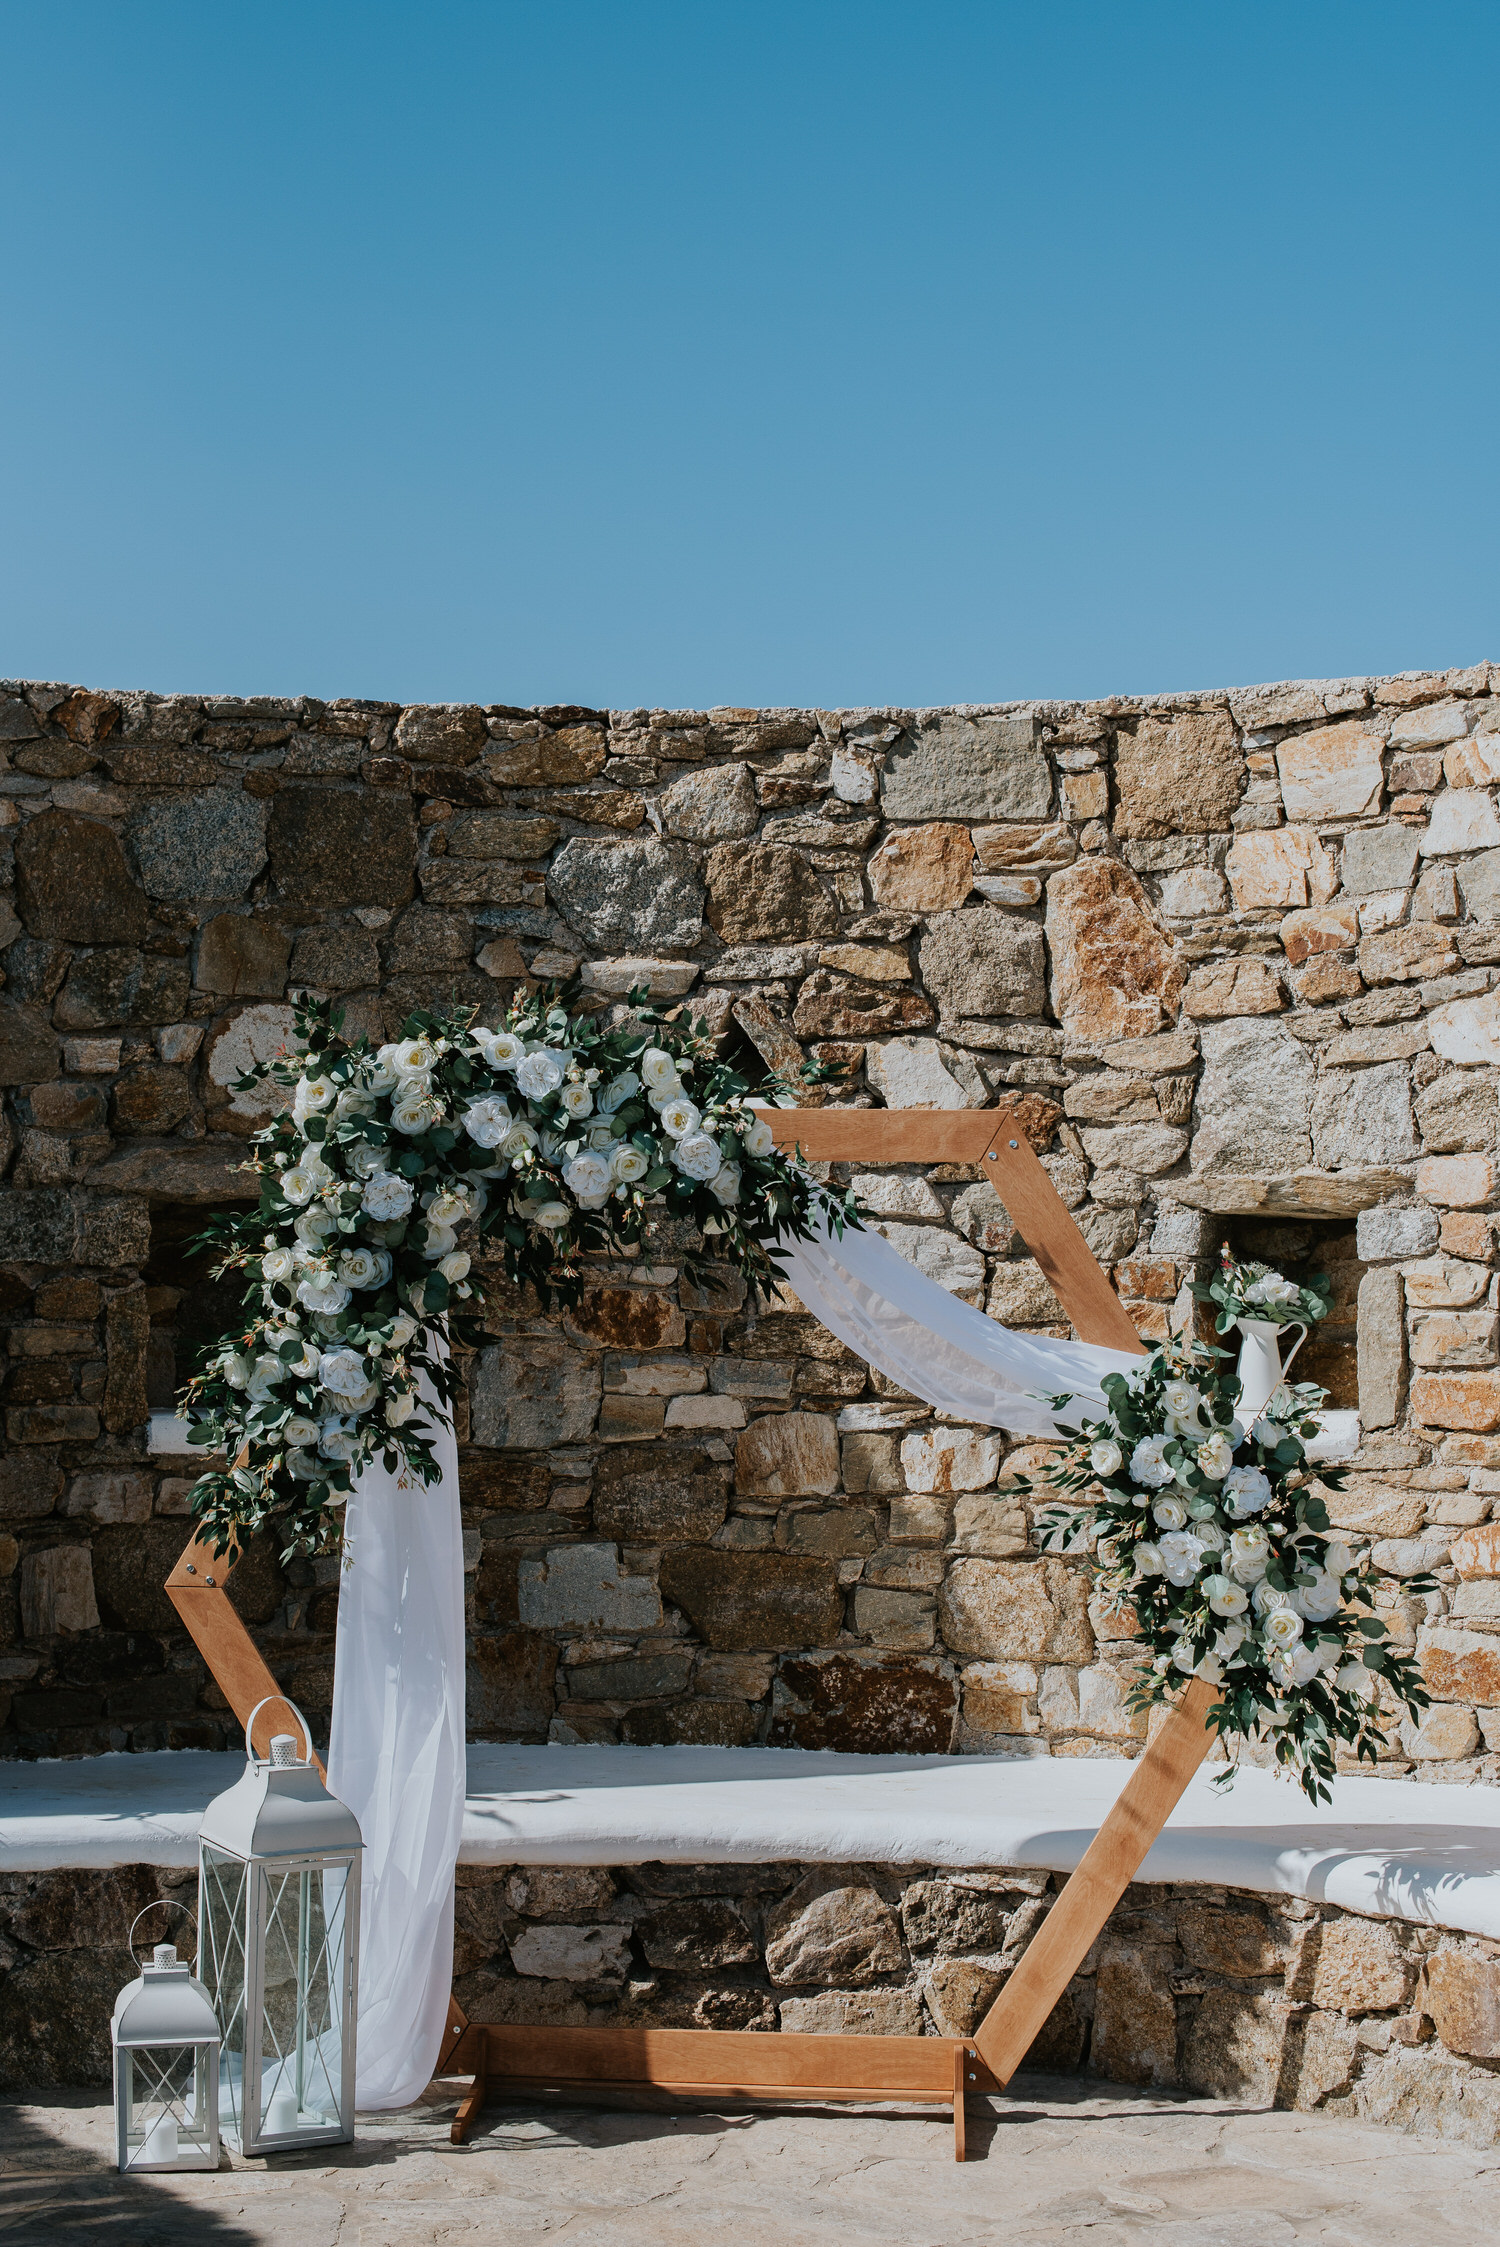 Mykonos wedding photographer: the floral arch detail against the rocky wall in the background.